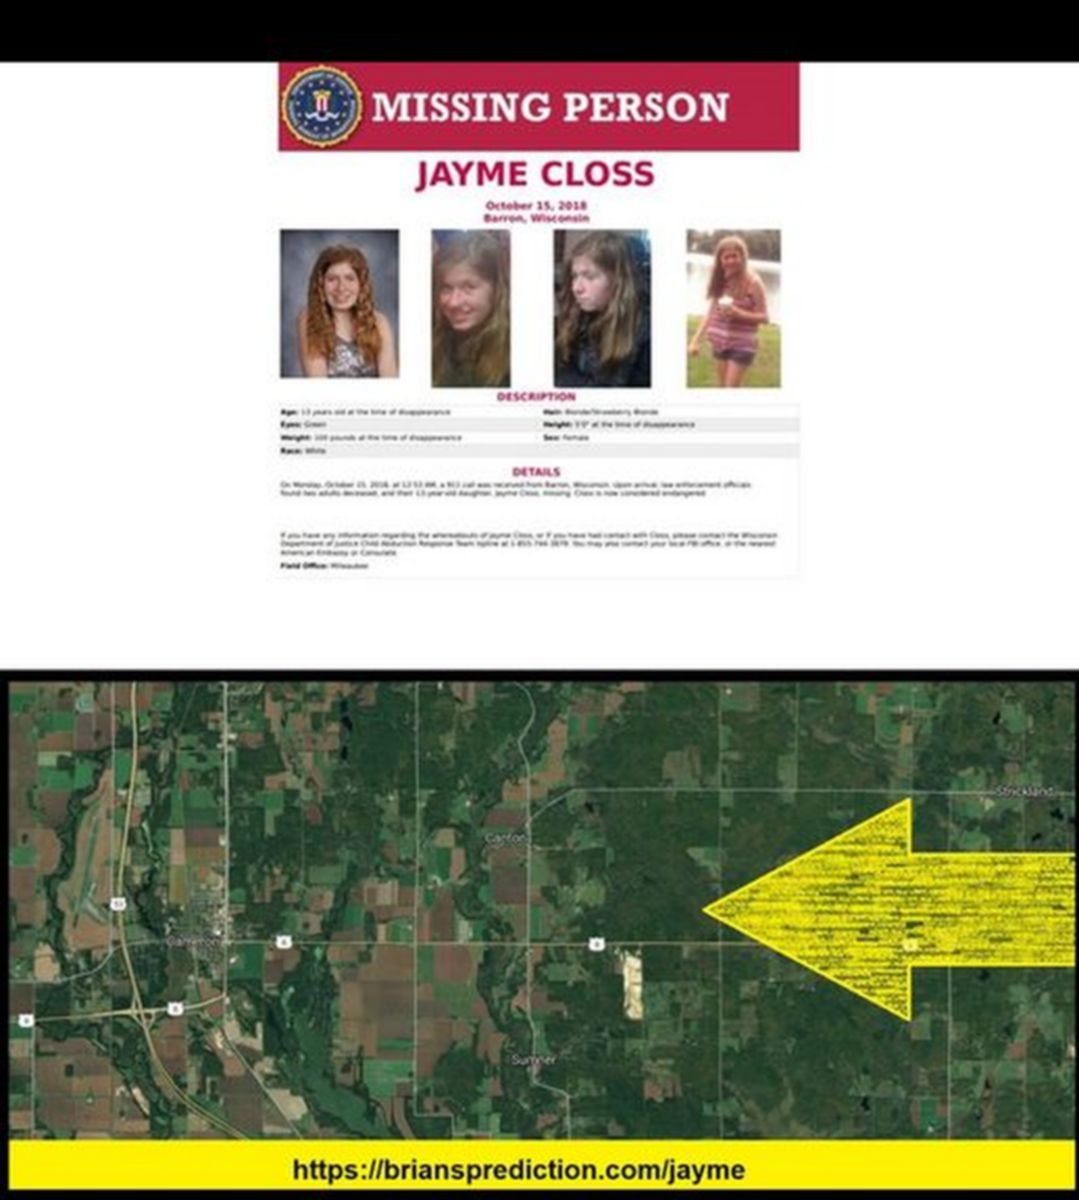 hania aguilar ebby steppach and jayme closs were taken by the same man fbi missing person jamye closs 1539959935706 png 59508727 ver1 0 640 360 psychic brian ladd 2018 2019 case updates
hania aguilar ebby steppach and jayme closs were taken by the same man fbi missing person jamye closs 1539959935706 png 59508727 ver1 0 640 360 psychic brian ladd 2018 2019 case updates
